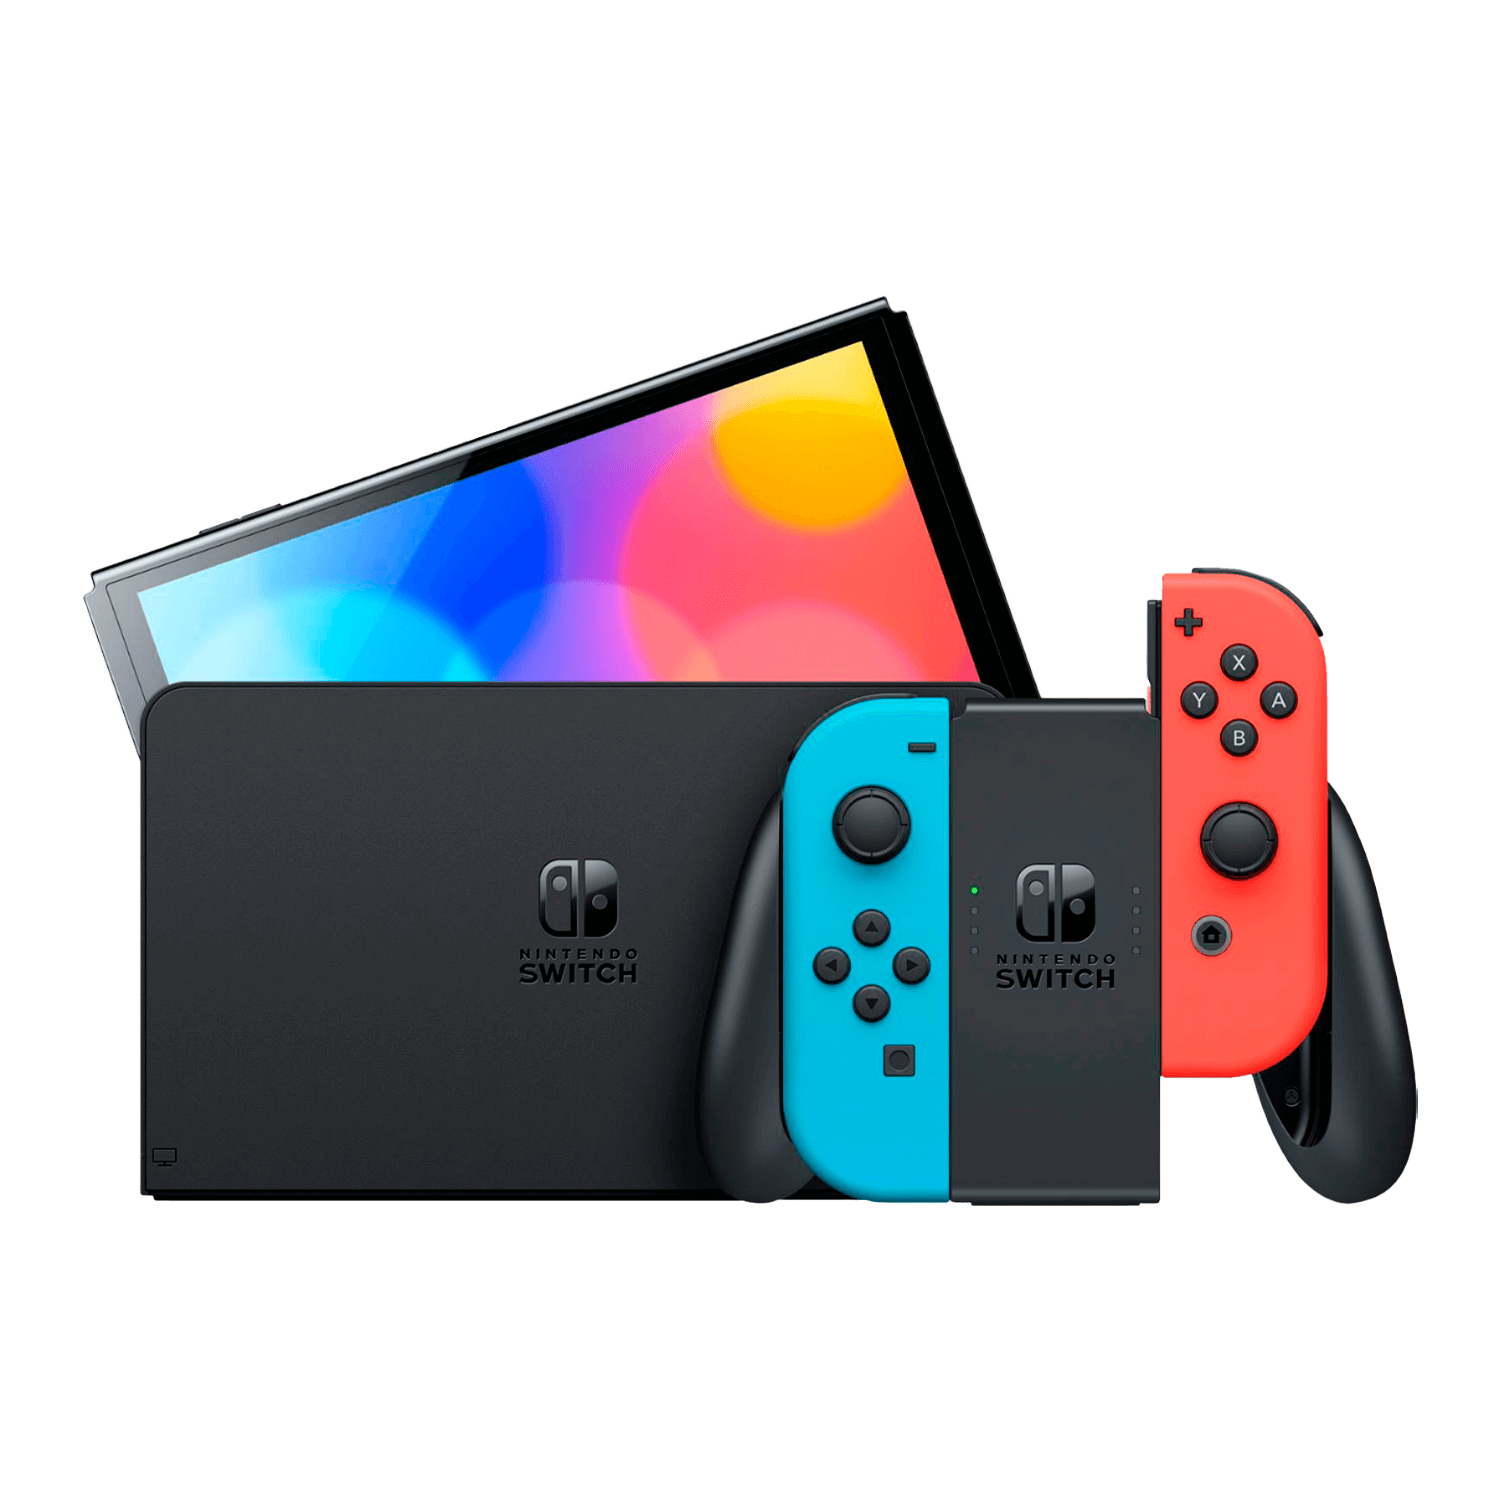 Console Nintendo Switch OLED 64GB Japão- Neon (HEG-S-KABAA) no 